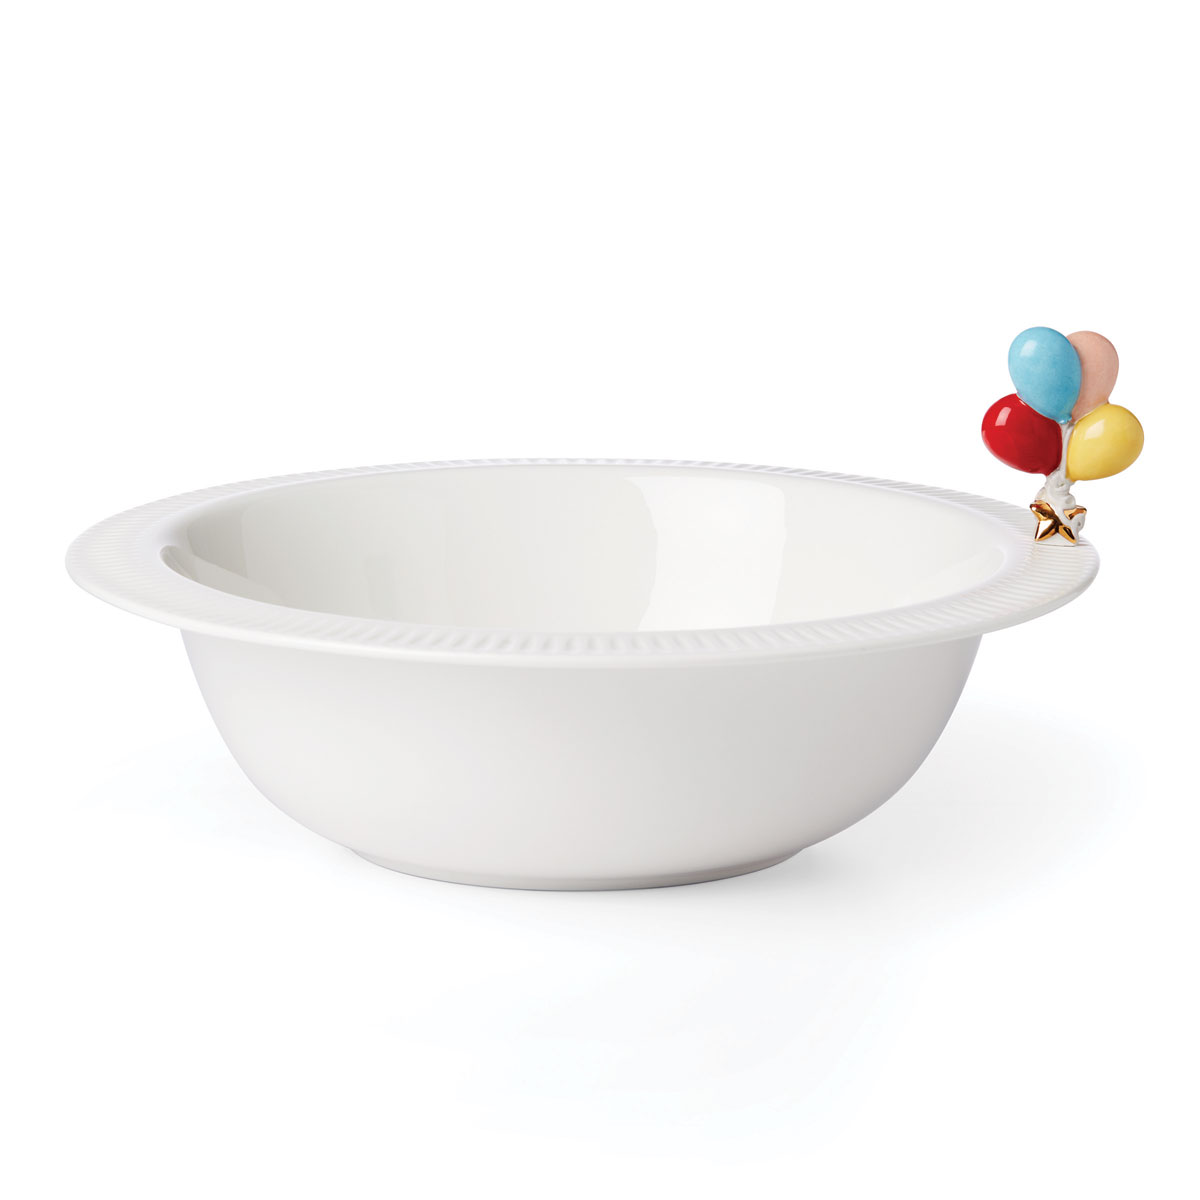 Lenox Profile Poppers Serving Bowl With Balloon Popper Set